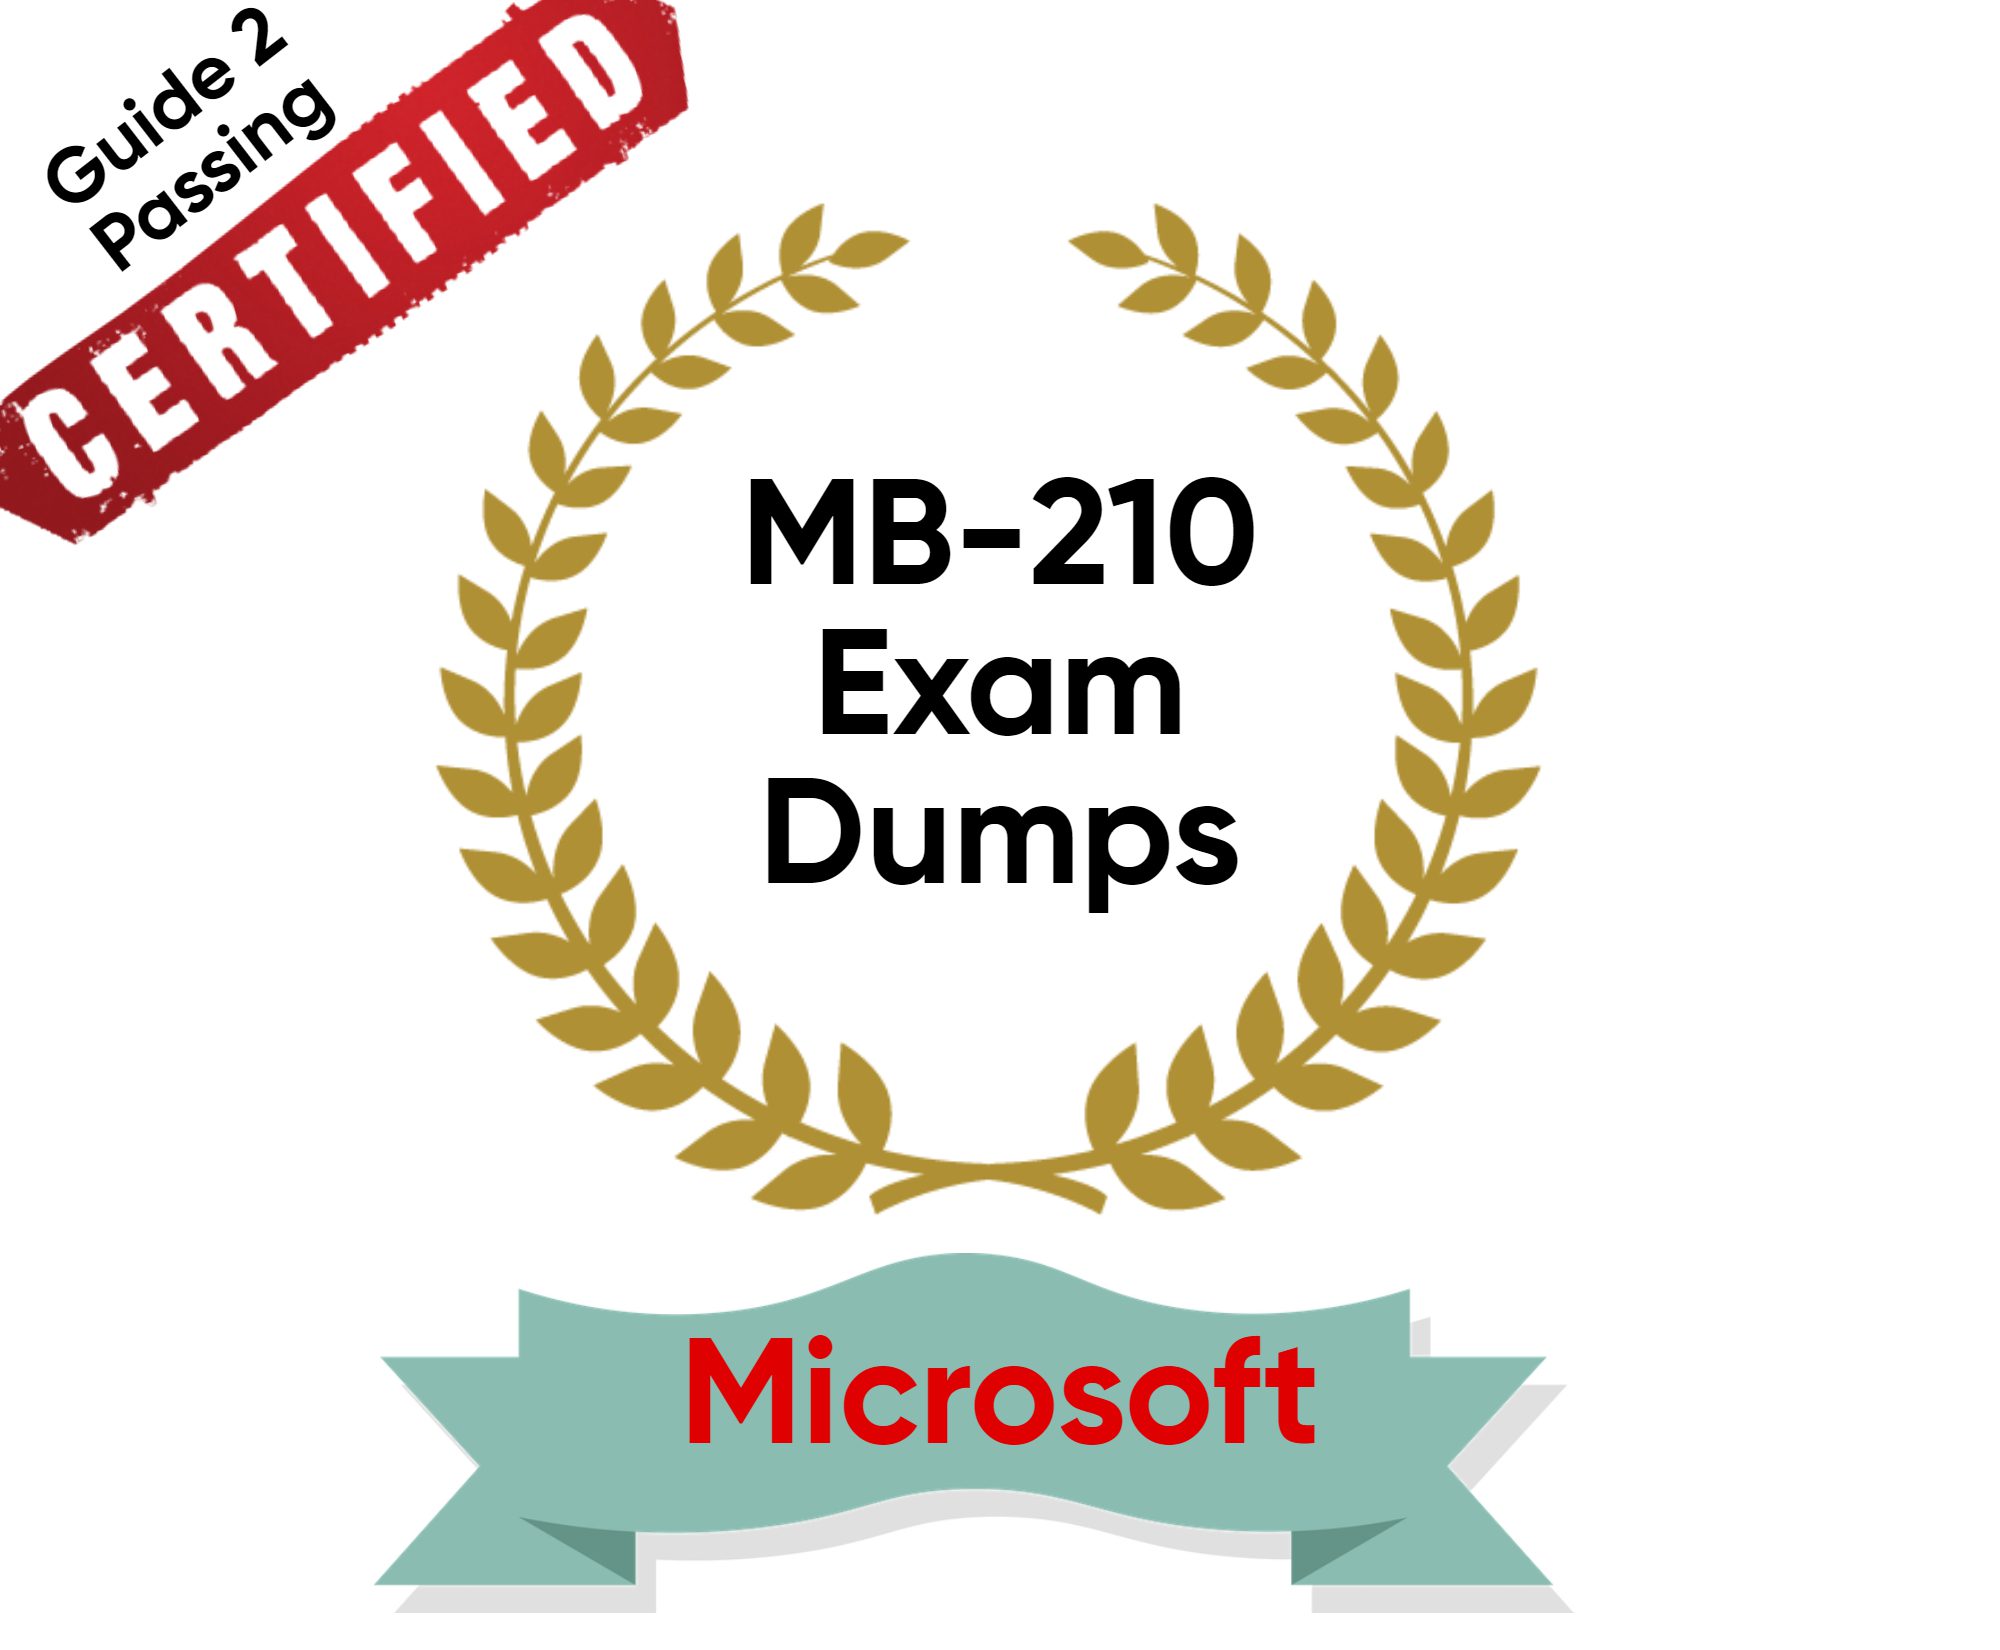 Pass Your Microsoft MB-210 Exam Dumps From Guide 2 Passing